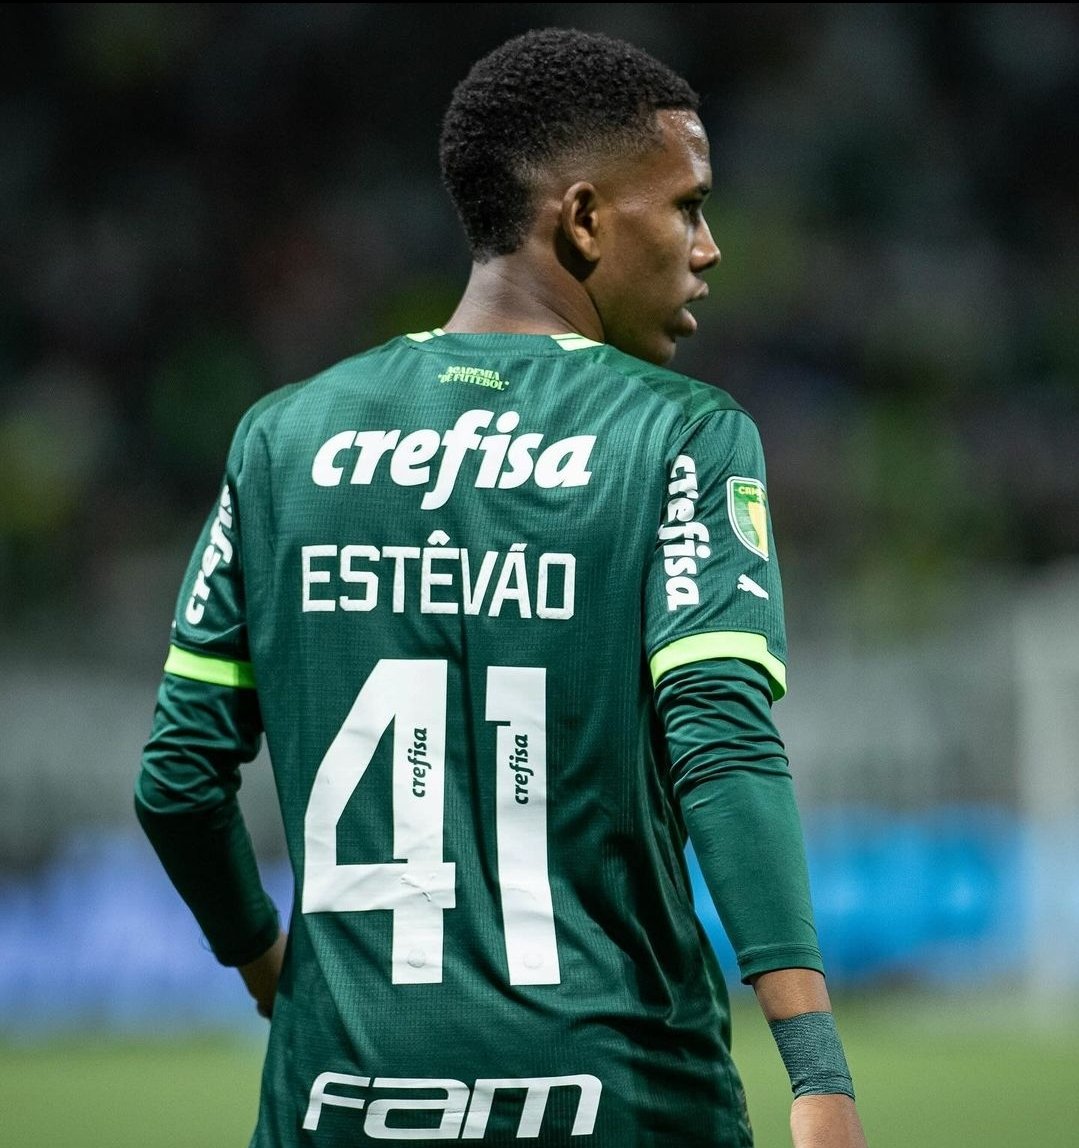 DEAL DONE✅ Chelsea have signed 17 year old Estevao Willian from Palmeiras for €65M. The most expensive sale in the history of America to Europe! The winger will head to Stamford Bridge in January 2025🇧🇷 #CFC (@Transfers)